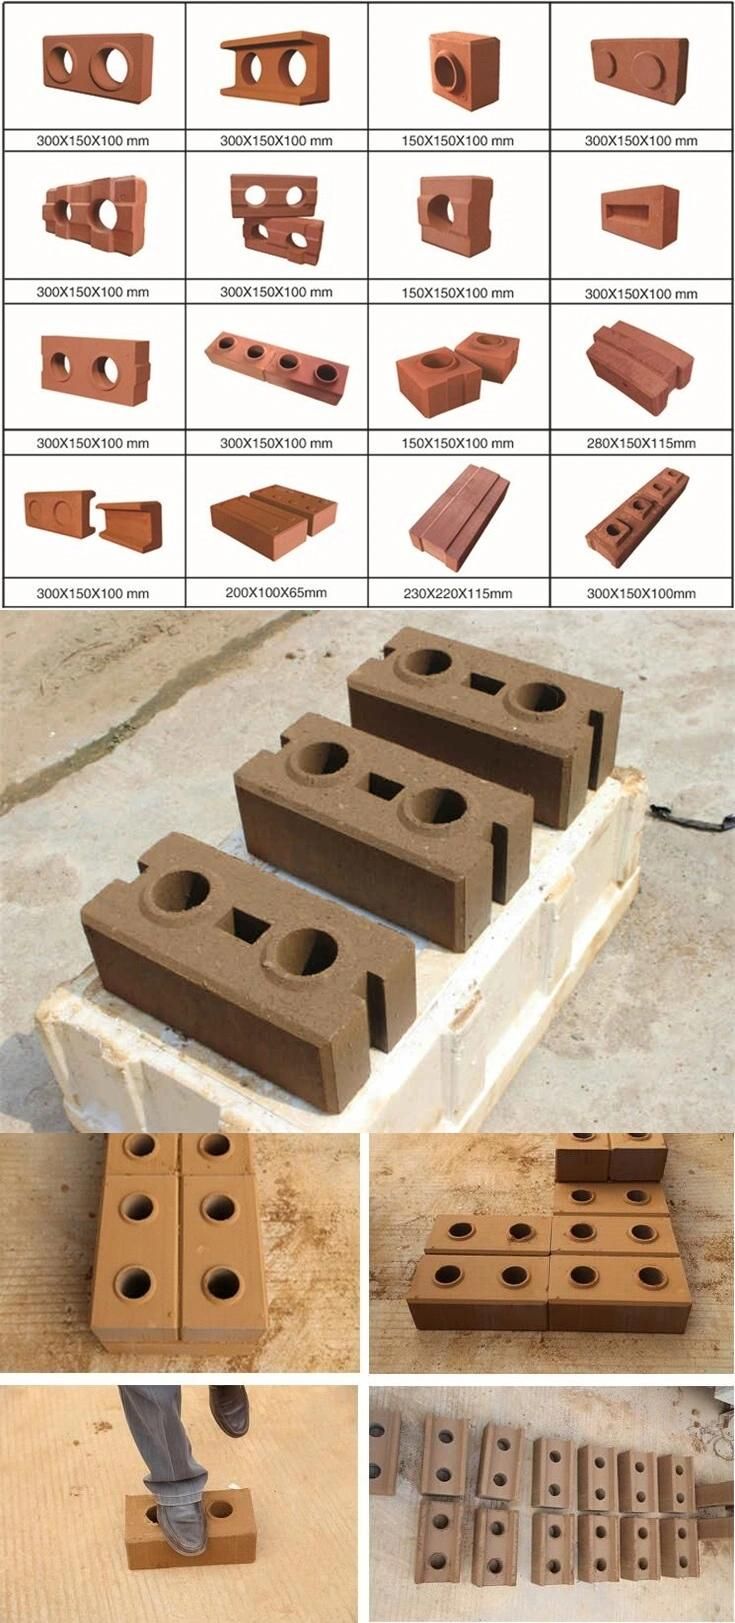 Small Investment Xm4-10 Clay Soil Earth Lego Interlocking Block Making Machine for Construction Materials